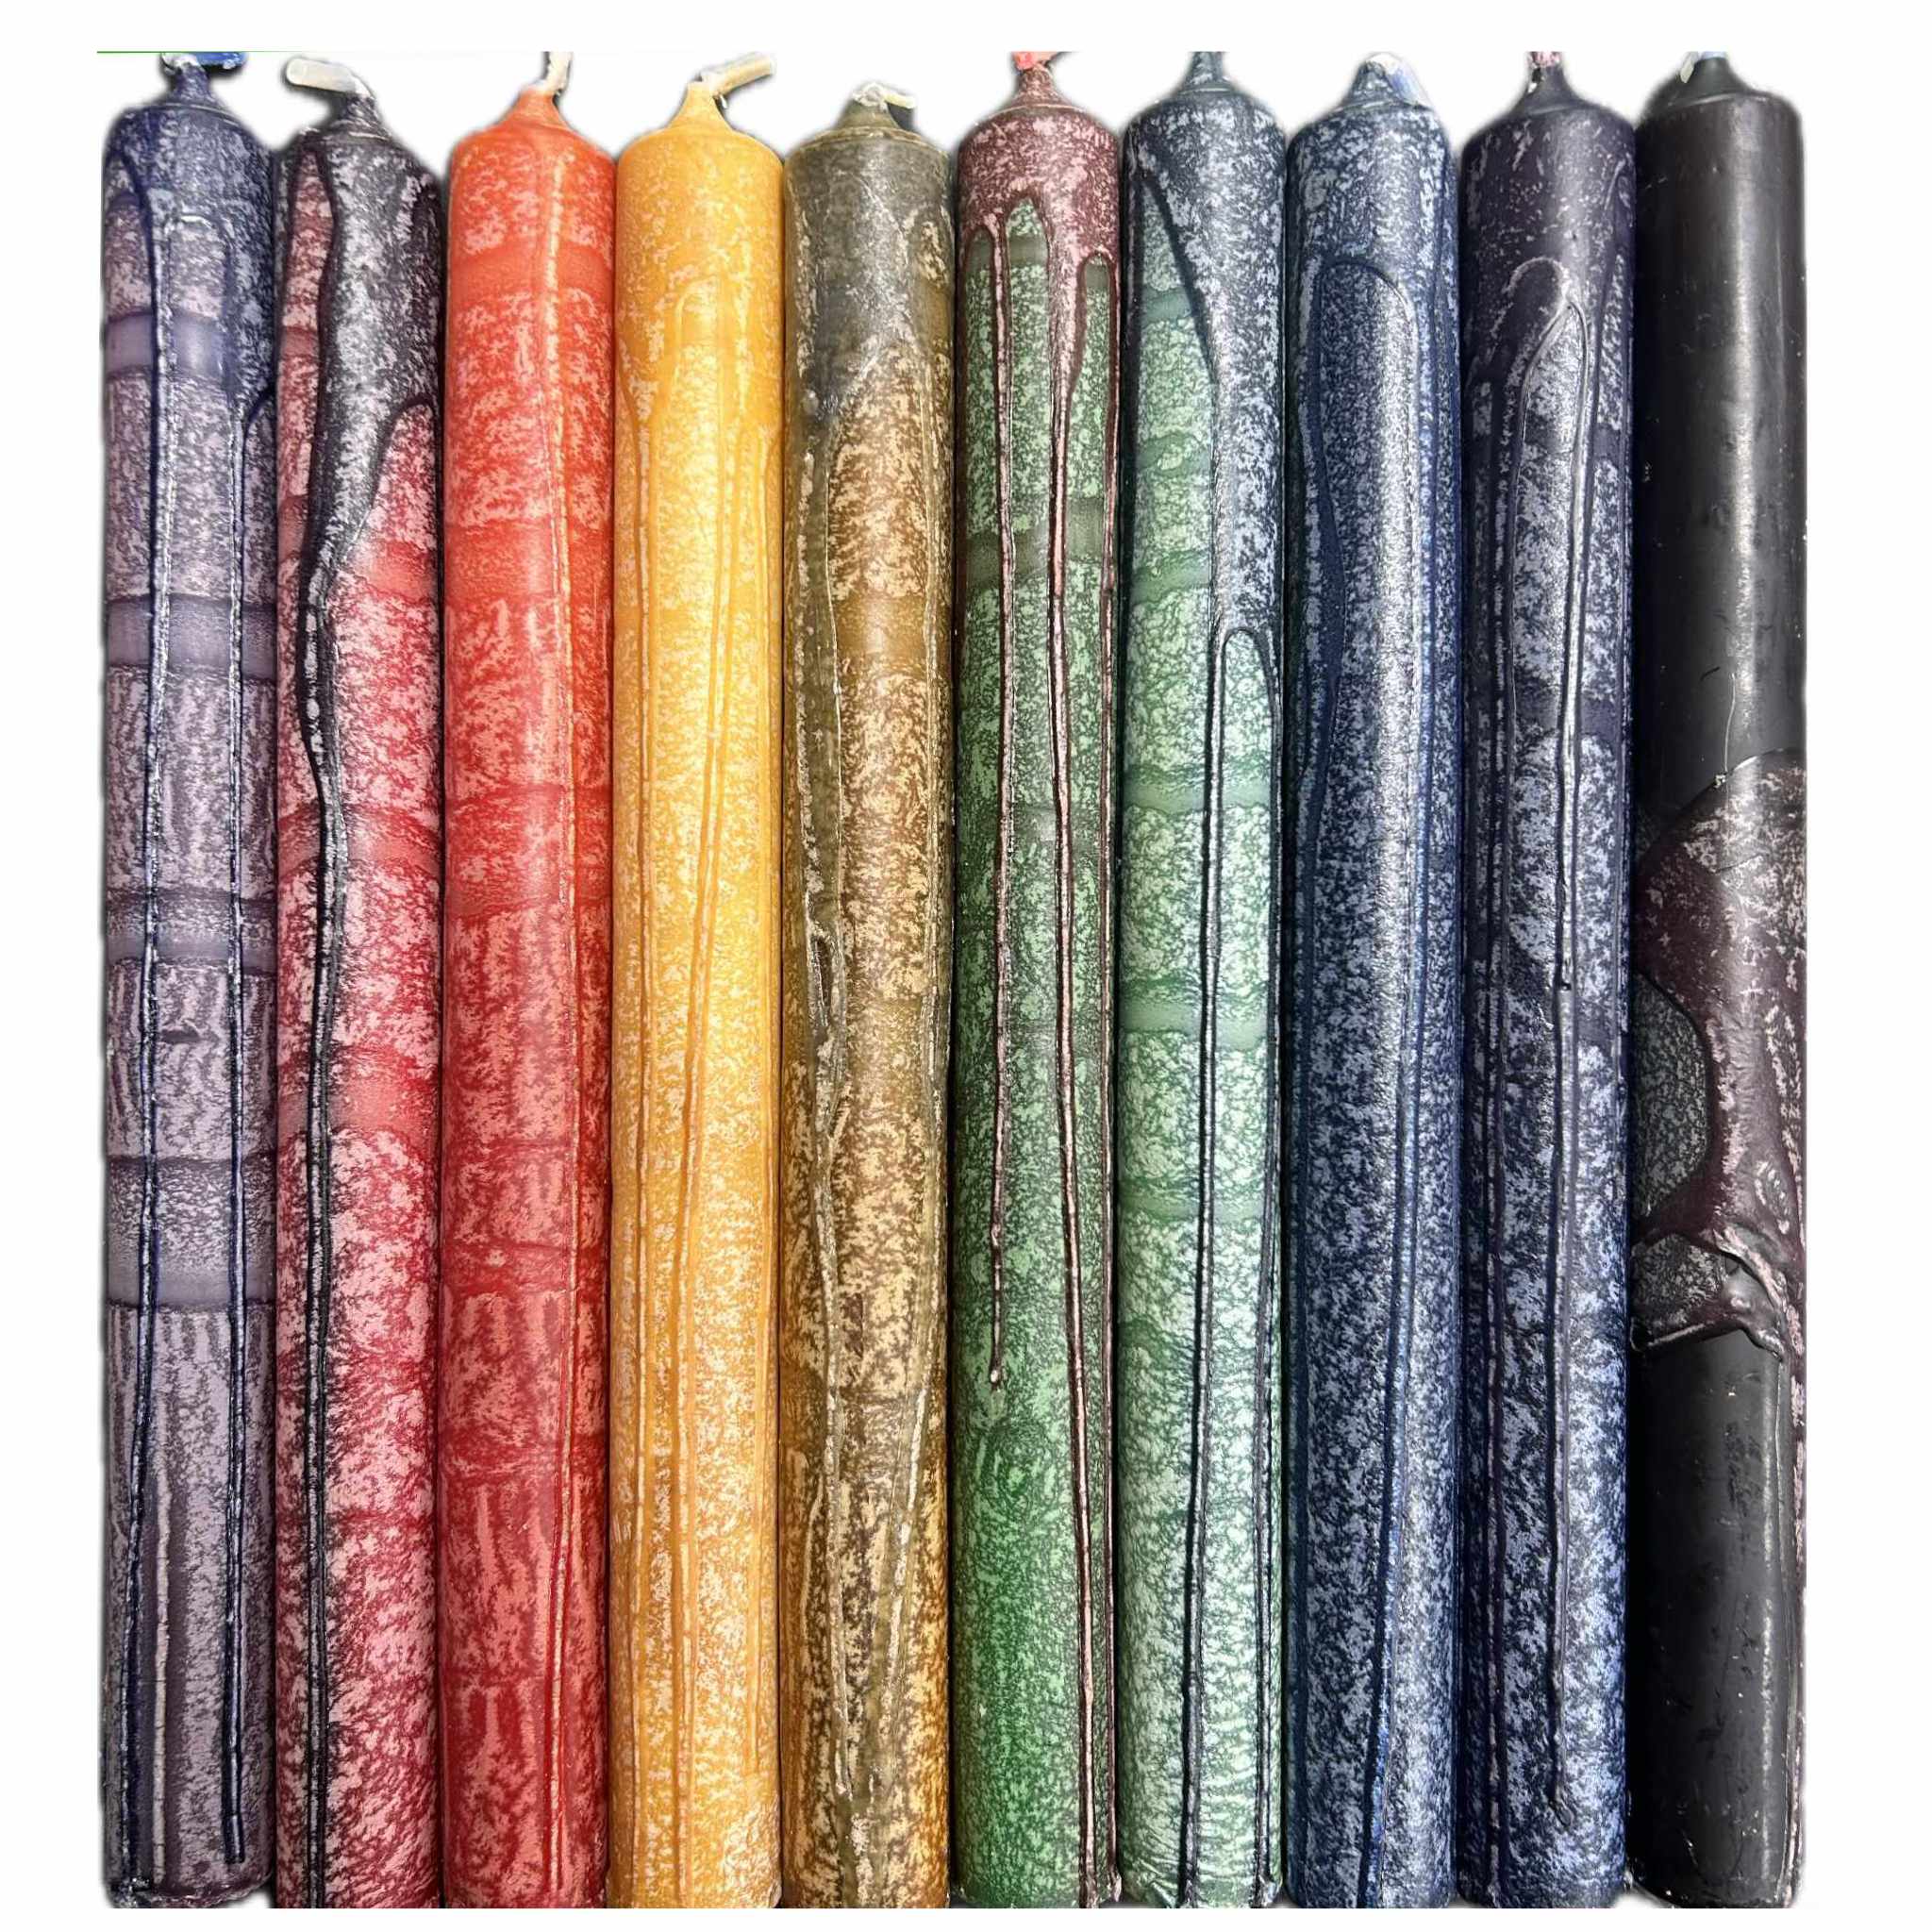 Dinner Candles, Fantasy Tall, Box of 16